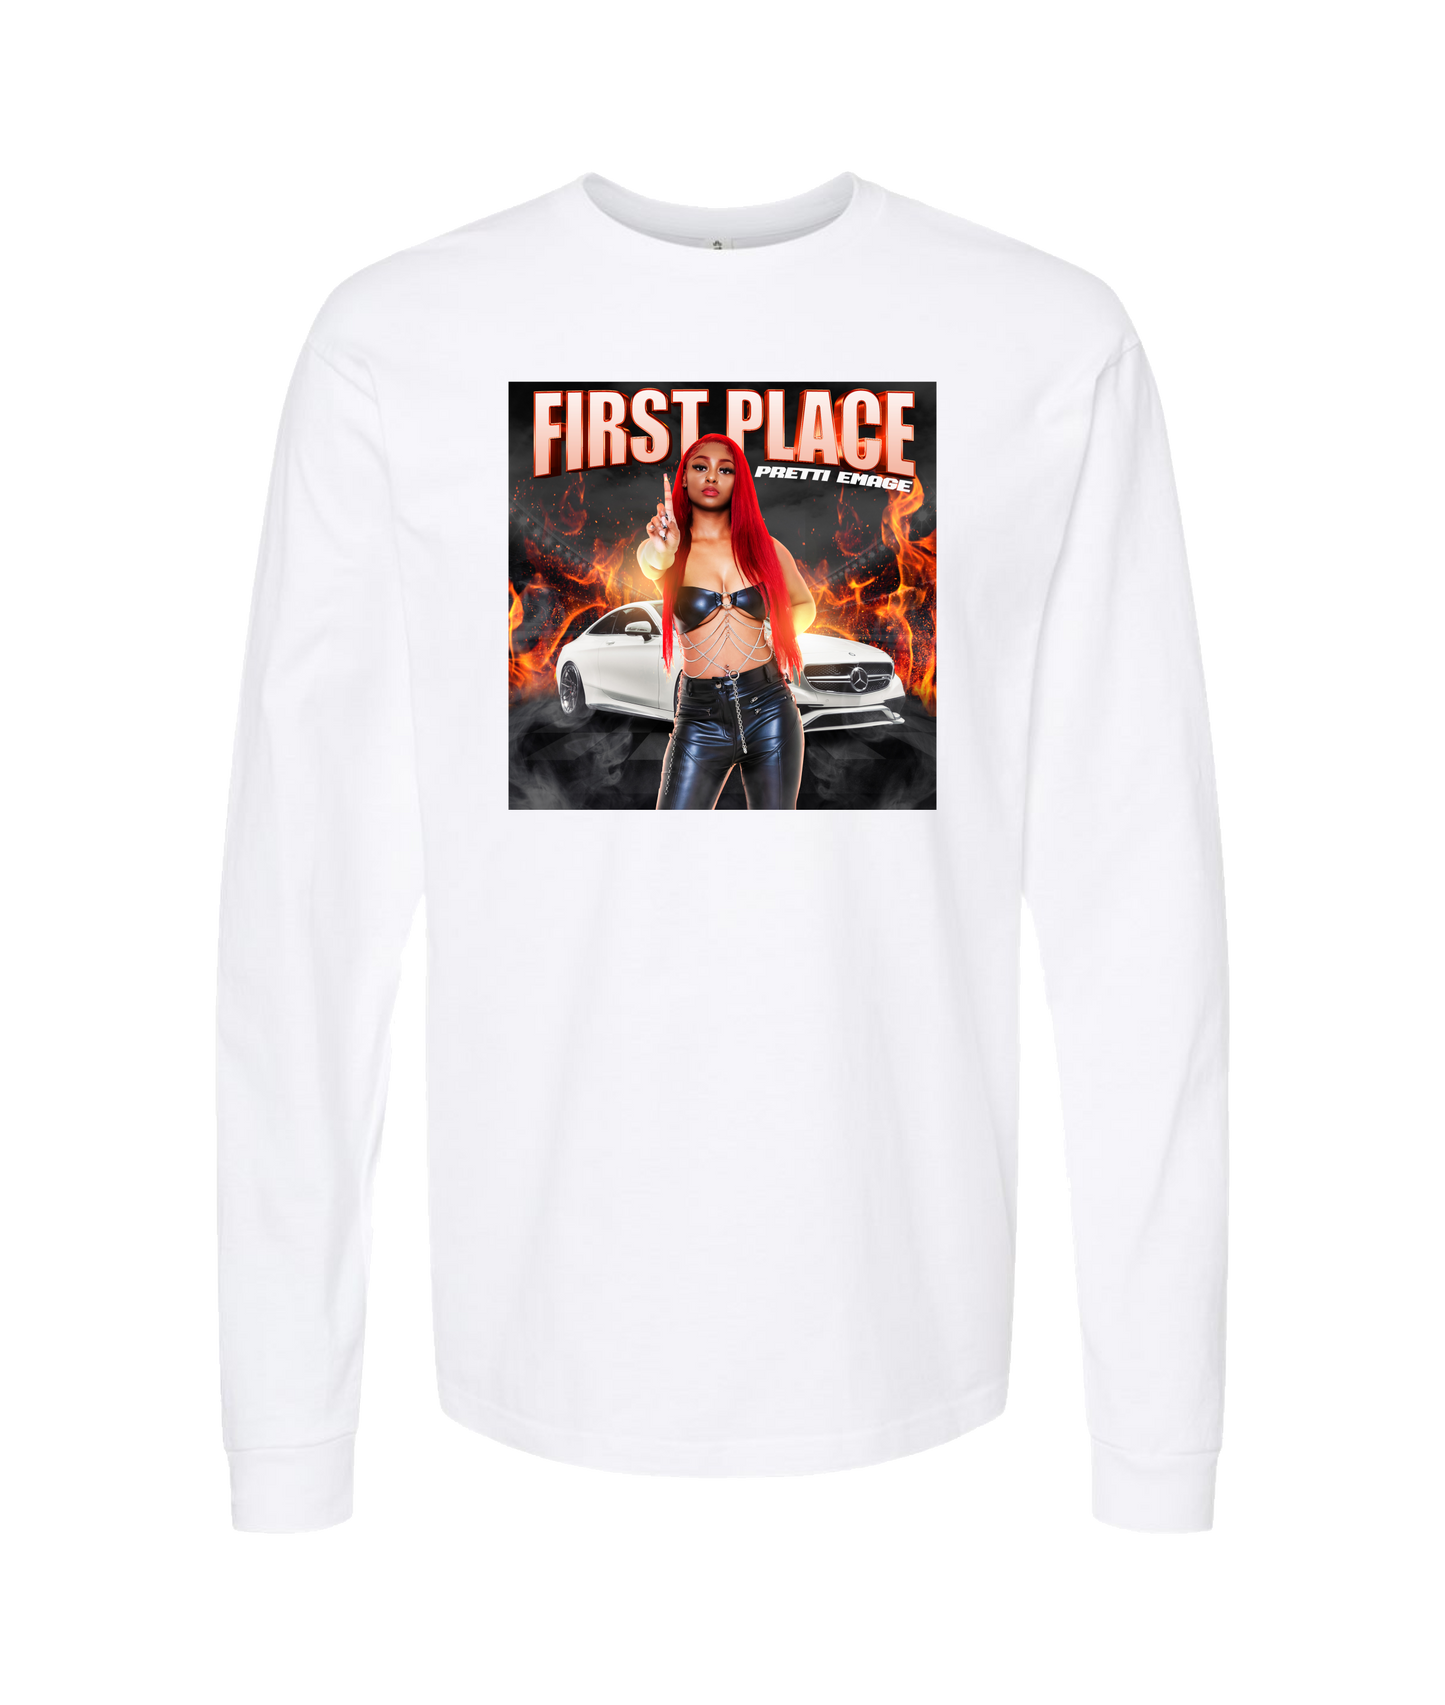 Pretti Emage - First Place - White Long Sleeve T